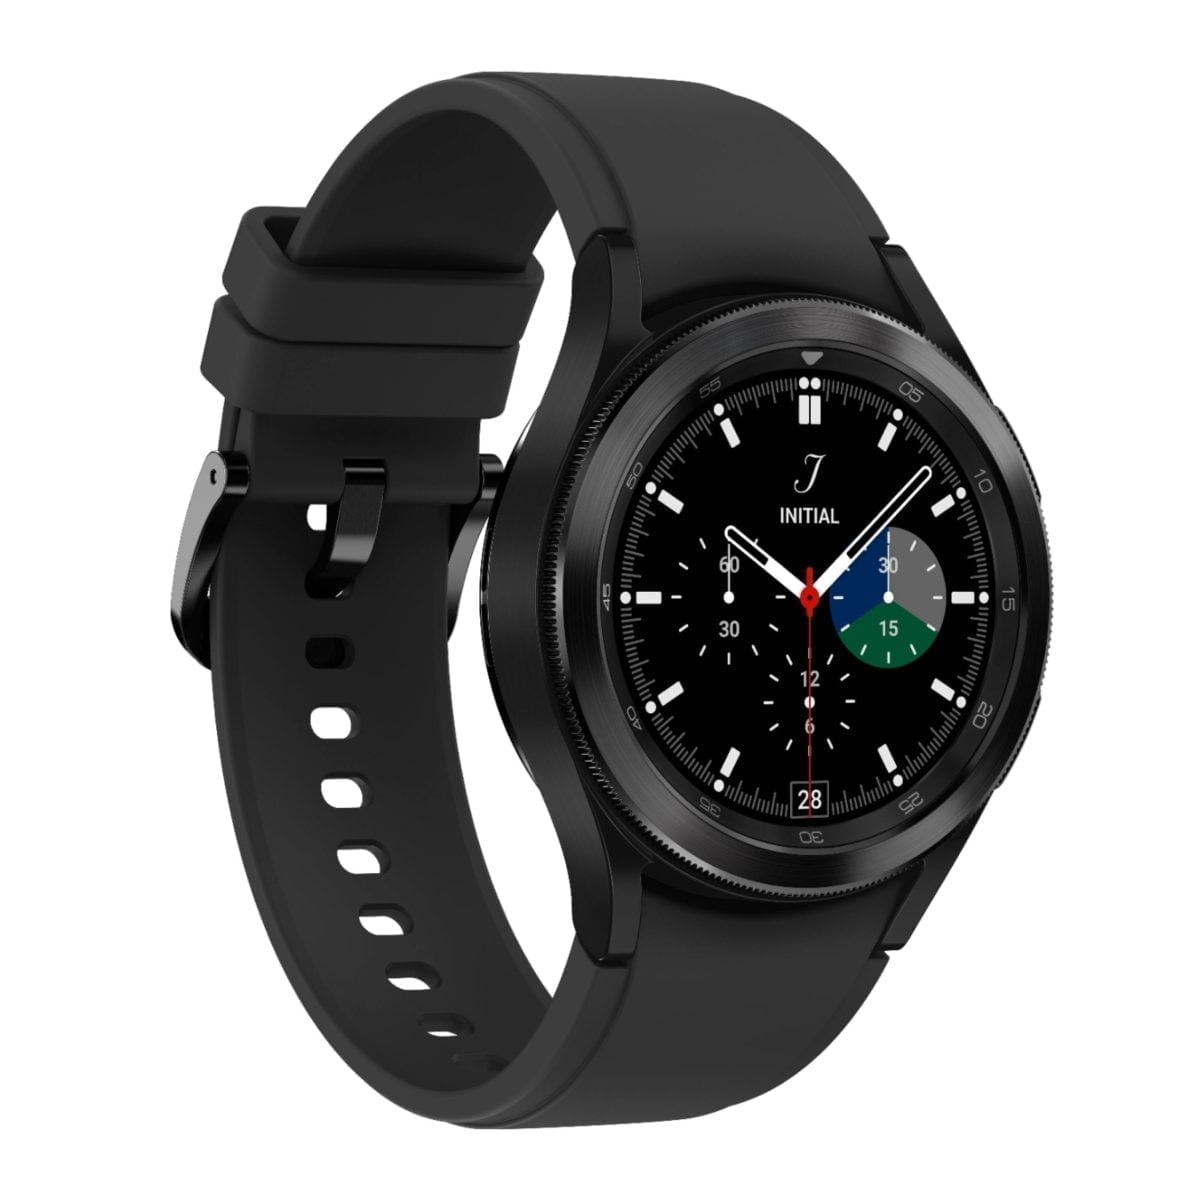 6464595Cv12D Scaled Samsung &Lt;Div Class=&Quot;Sku-Title&Quot;&Gt; &Lt;Div Class=&Quot;Sku-Title&Quot;&Gt; &Lt;H1 Class=&Quot;Heading-5 V-Fw-Regular&Quot;&Gt;Samsung - Galaxy Watch4 Classic Stainless Steel Smartwatch 46Mm Bt - Black &Lt;Strong&Gt;Model&Lt;/Strong&Gt;:&Lt;Span Class=&Quot;Product-Data-Value Body-Copy&Quot; Style=&Quot;Color: #333333; Font-Size: 16Px;&Quot;&Gt;Sm-R890Nzkaxaa&Lt;/Span&Gt;&Lt;/H1&Gt; &Lt;/Div&Gt; Https://Www.youtube.com/Watch?V=Plte1N8Pl90 &Lt;/Div&Gt; &Lt;Div Class=&Quot;Title-Data Lv &Quot;&Gt; &Lt;Div Class=&Quot;Embedded-Component-Container Lv Product-Description&Quot;&Gt; &Lt;Div Id=&Quot;Shop-Product-Description-93715662&Quot; Class=&Quot;None&Quot; Data-Version=&Quot;1.3.38&Quot;&Gt; &Lt;Div Class=&Quot;Shop-Product-Description&Quot;&Gt;&Lt;Section Class=&Quot;Align-Heading-Left&Quot; Data-Reactroot=&Quot;&Quot;&Gt; &Lt;Div Class=&Quot;Long-Description-Container Body-Copy &Quot;&Gt; &Lt;Div Class=&Quot;Html-Fragment&Quot;&Gt; &Lt;Div&Gt;Your Style. Your Health. Look Good And Feel Great With Your Smart, New Companion, Samsung Galaxy Watch 4 Classic. Make A Stylish Statement With An Iconic Silhouette And Stainless-Steel Casing, While Your Watch Keeps You In Tune With Your Health And Pushes You To Go Further. Make The Most Of Every Run With Advanced Coaching And Oxygen-Level Monitoring¹ That Help You Exercise Smarter While Increasing Endurance. Leave Your Phone Behind While Staying Connected — Call, Text And Stream Music,All From Your Wrist With Lte Connectivity. Galaxy Watch4 Classic Is Health Evolved. 1Accurate Vo2 Max Reading Requires Running Outdoors For At Least 20 Minutes With Gps On; Consult User Manual Before Use. ¹The Vo2 Max Software Functions Are Not Intended For Use In The Diagnosis Of Disease Or Other Conditions, Or In The Cure, Mitigation, Treatment Or Prevention Of Disease.&Lt;/Div&Gt; &Lt;Div&Gt;&Lt;/Div&Gt; &Lt;Div&Gt;&Lt;/Div&Gt; &Lt;/Div&Gt; &Lt;/Div&Gt; &Lt;/Section&Gt;&Lt;/Div&Gt; &Lt;/Div&Gt; &Lt;/Div&Gt; &Lt;/Div&Gt; Galaxy Watch4 Classic Samsung Galaxy Watch4 Classic Stainless Steel Smartwatch 46Mm Bt - Black